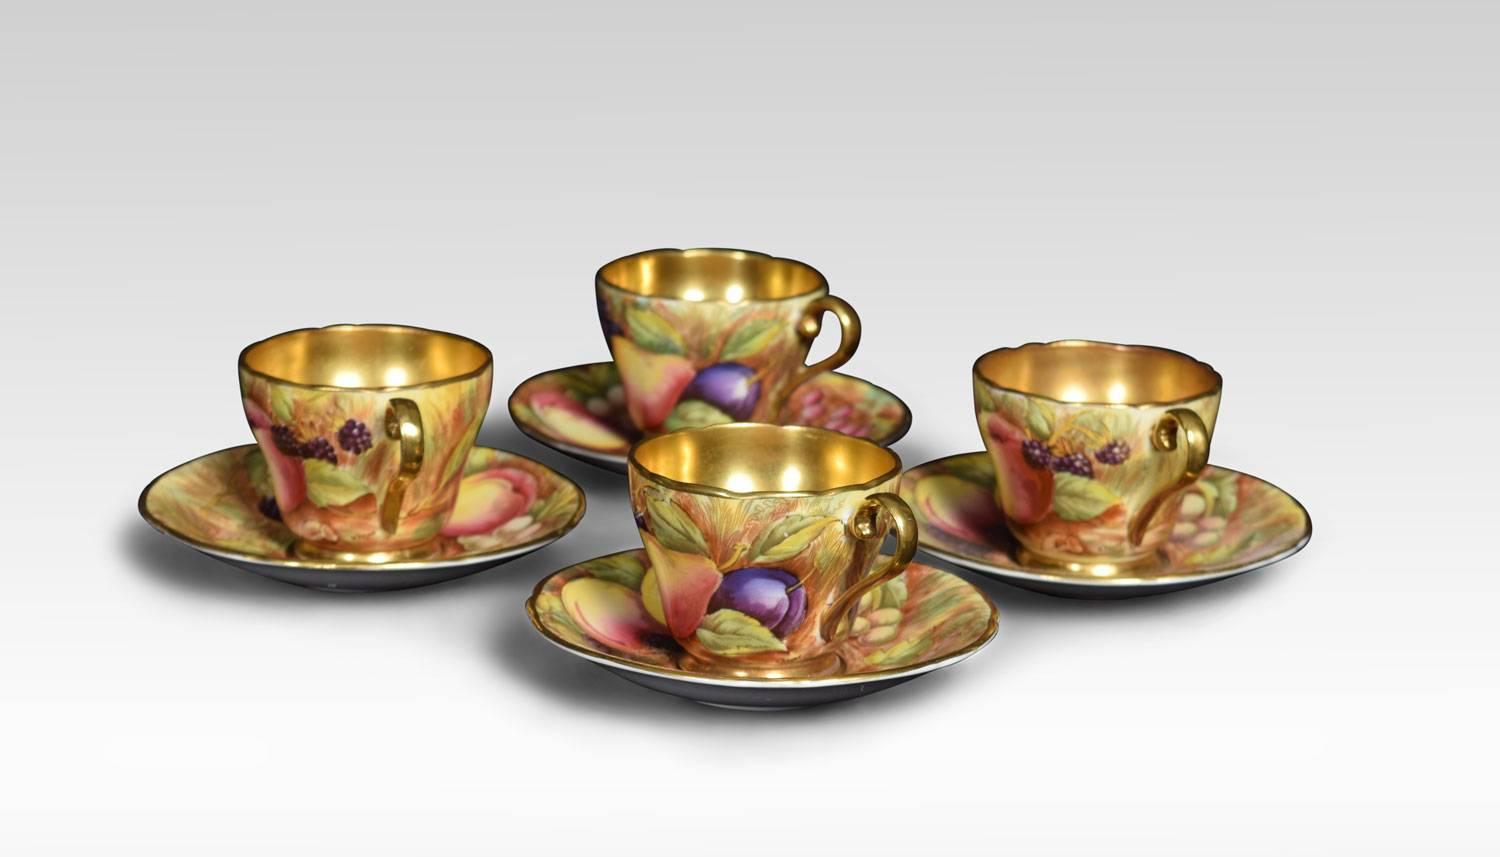 Aynsley tea service painted with fruit by D. Jones with gilt interiors comprising; teapot, sugar bowl, milk jug, four teacups and four saucers.
Dimensions

Cups
Height 2 Inches
Width 2.5 Inches
Depth 3.5 Inches

Saucers
Height 0.5 Inches
Width 5